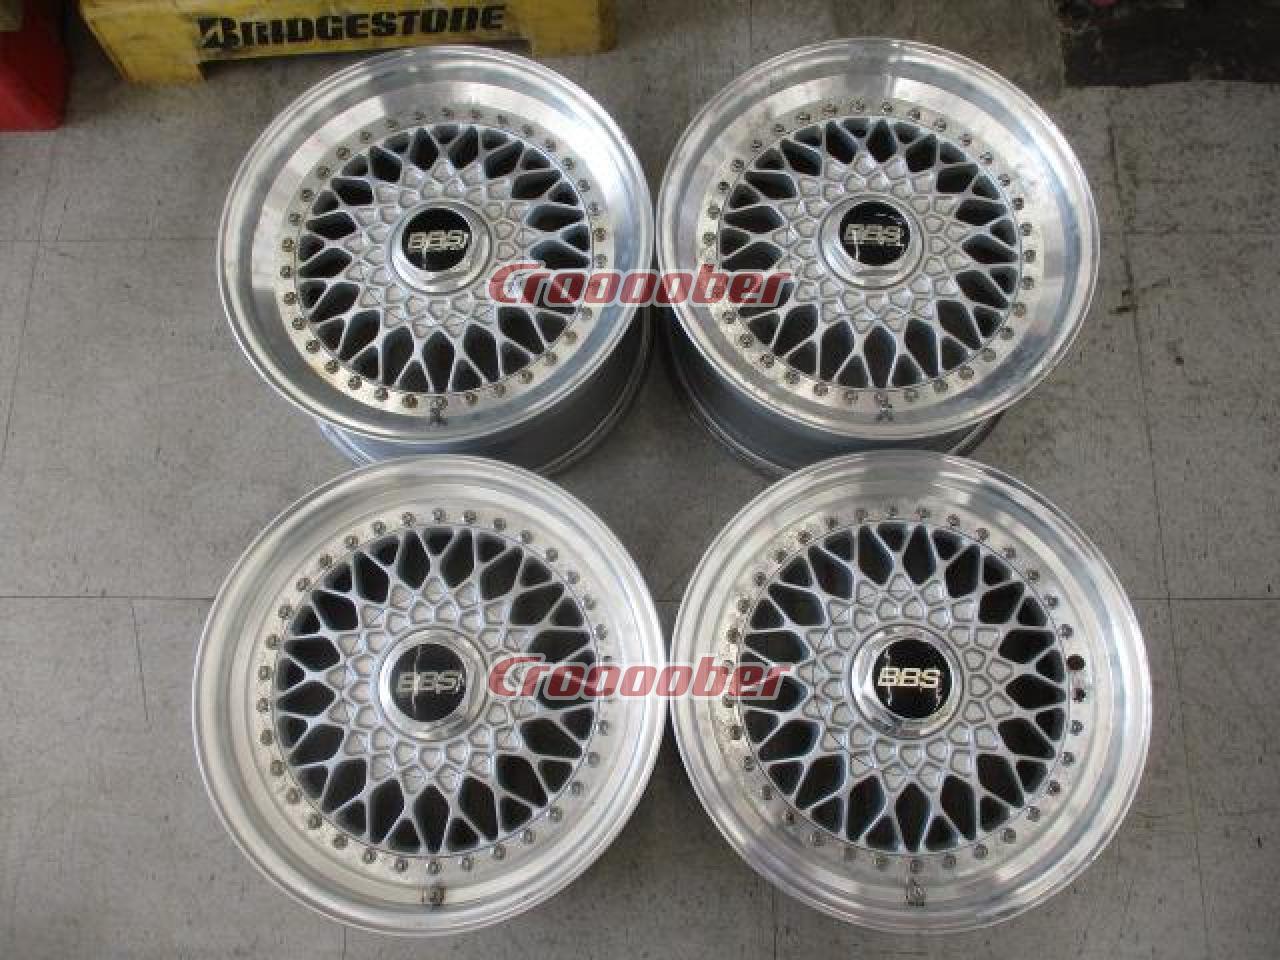 BBS Original Bbs Rs 174 16” 5x114,3 7Jx16” ET 33 In Used Condition 